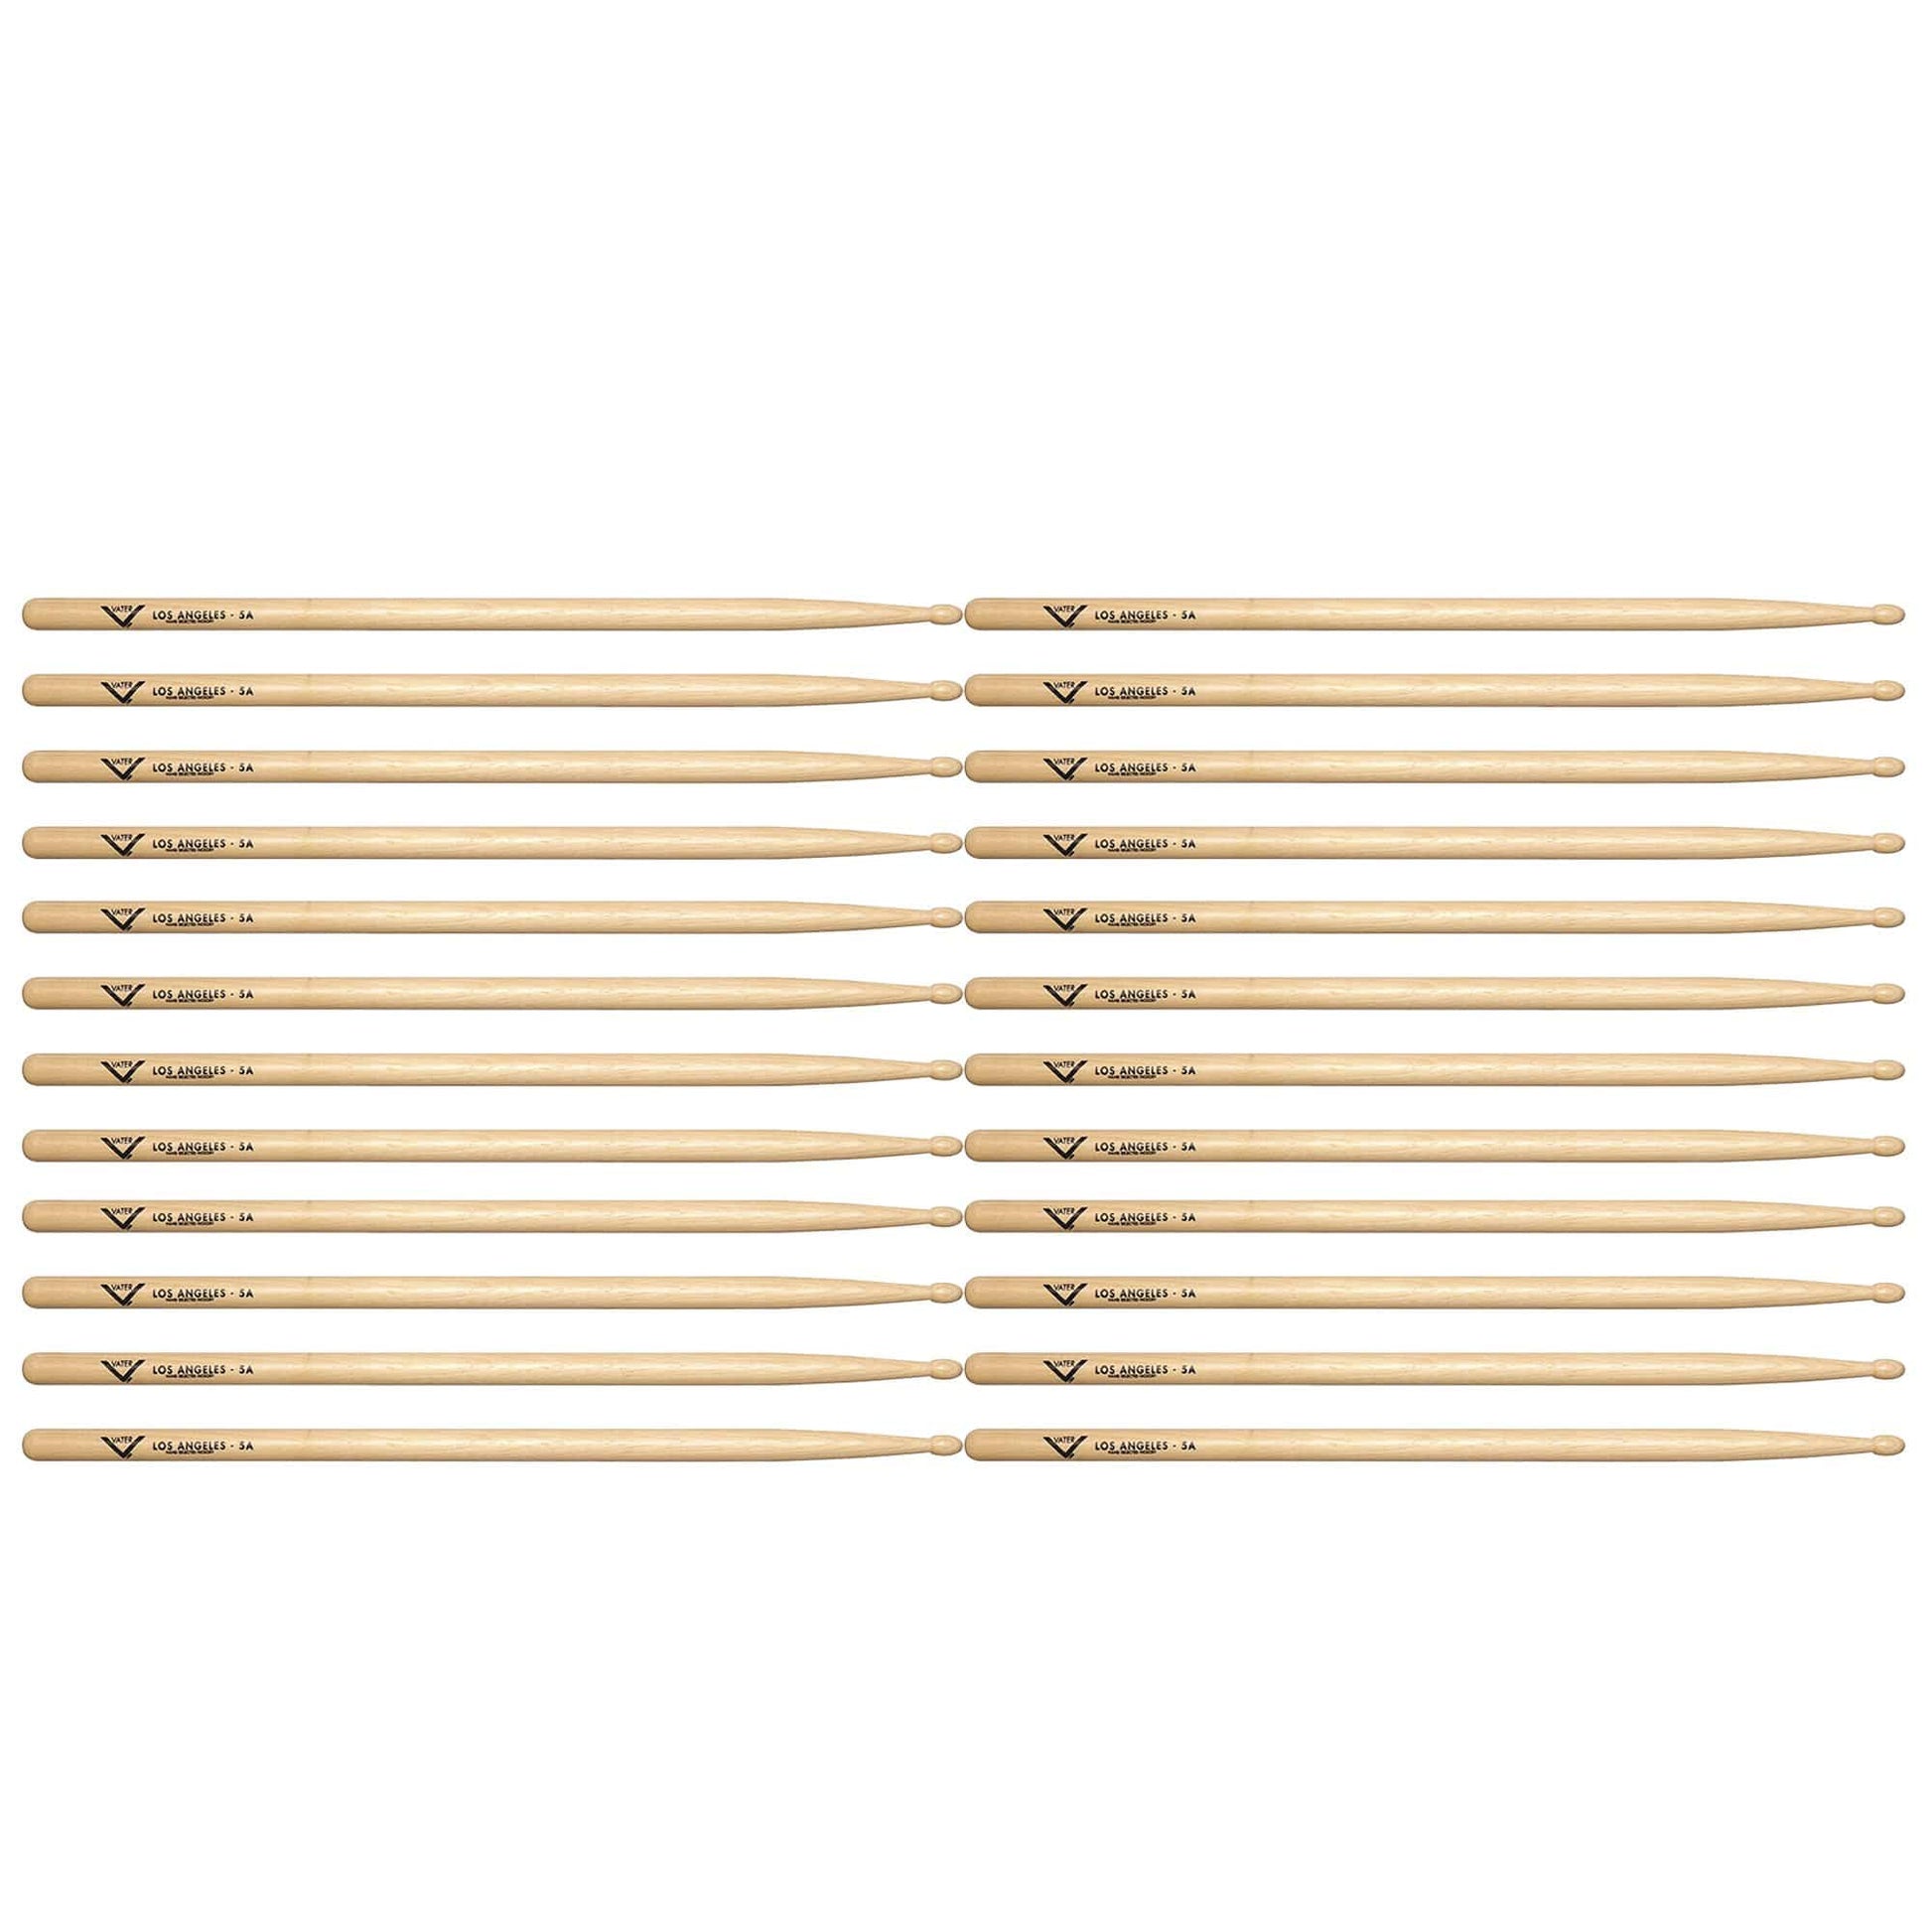 Vater Hickory Los Angeles 5A Wood Tip Drum Sticks (12 Pair Bundle) Drums and Percussion / Parts and Accessories / Drum Sticks and Mallets